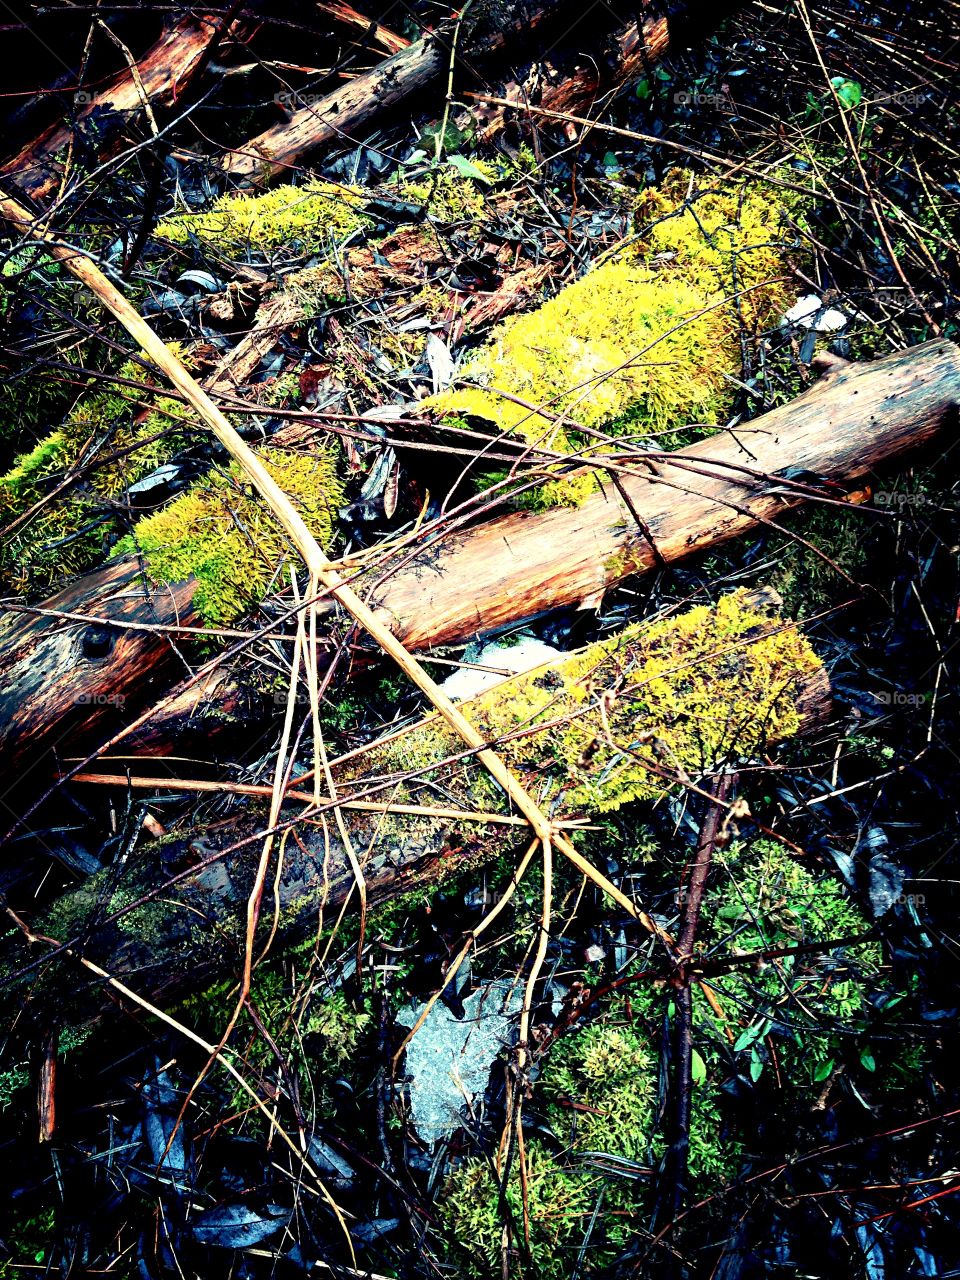 Woodland Glow. Rotting logs in winter woods